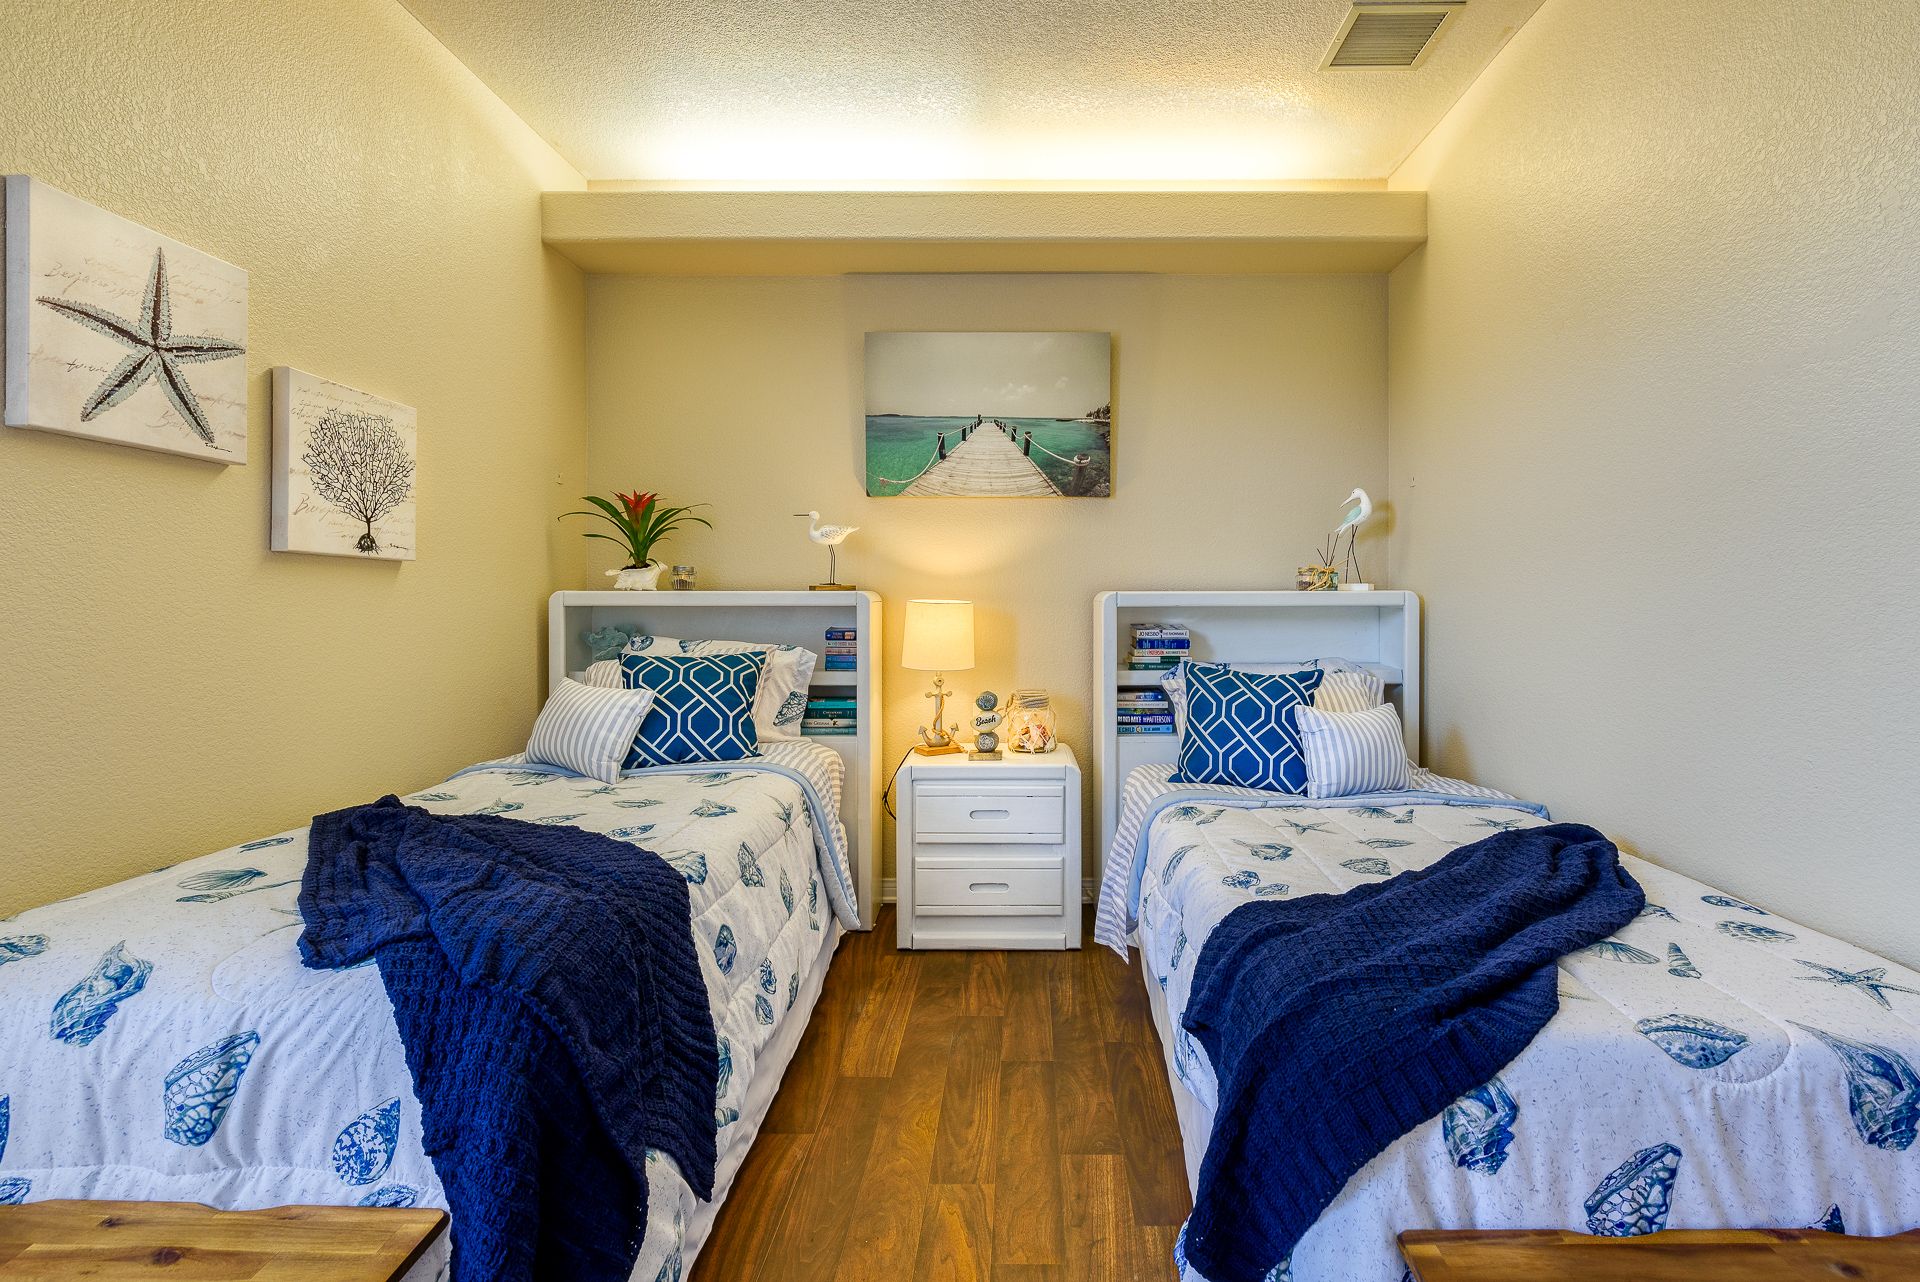 Interior view of a furnished bedroom at Pacifica Senior Living Newport Mesa with hardwood flooring.